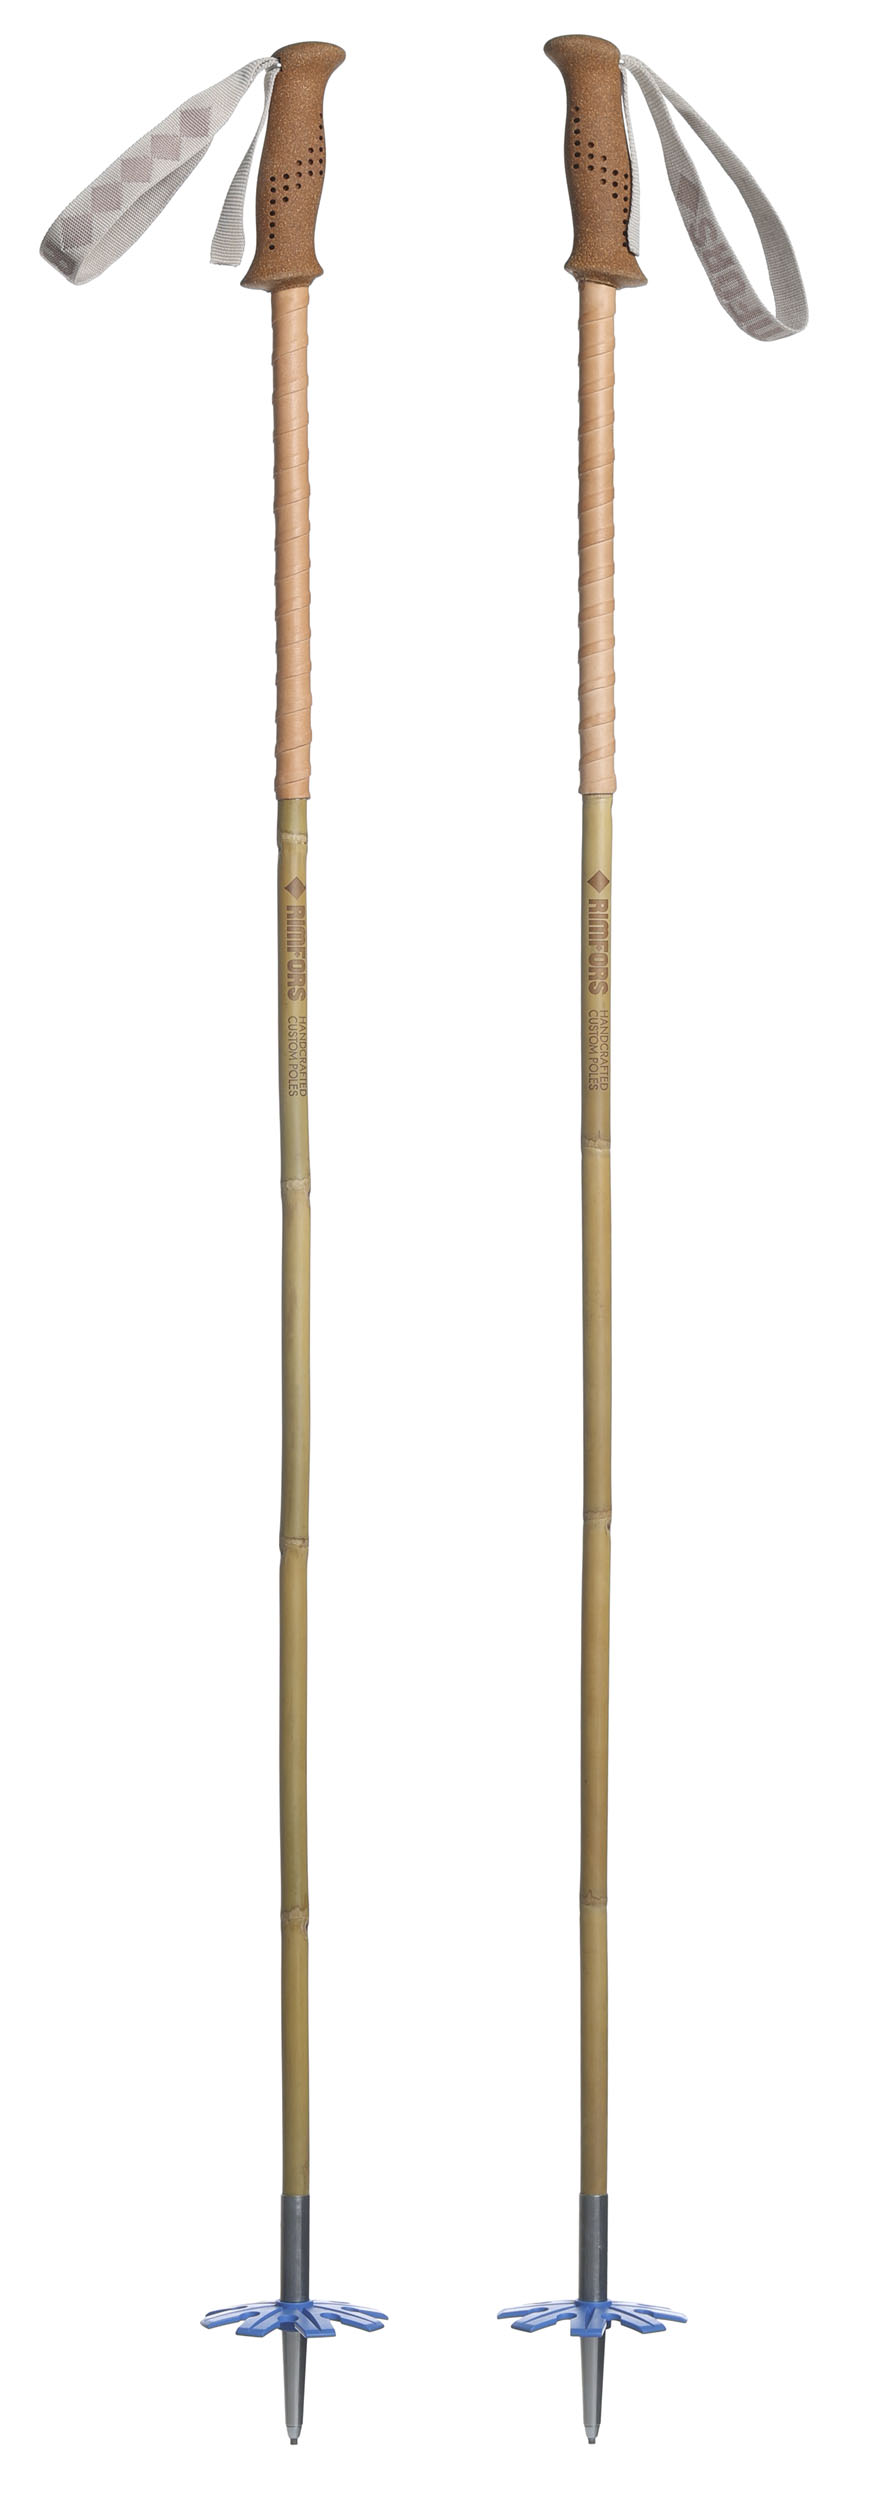 Bamboo ski poles with cork grips and blue 100 mm powder baskets + extended grip of reindeer leather.